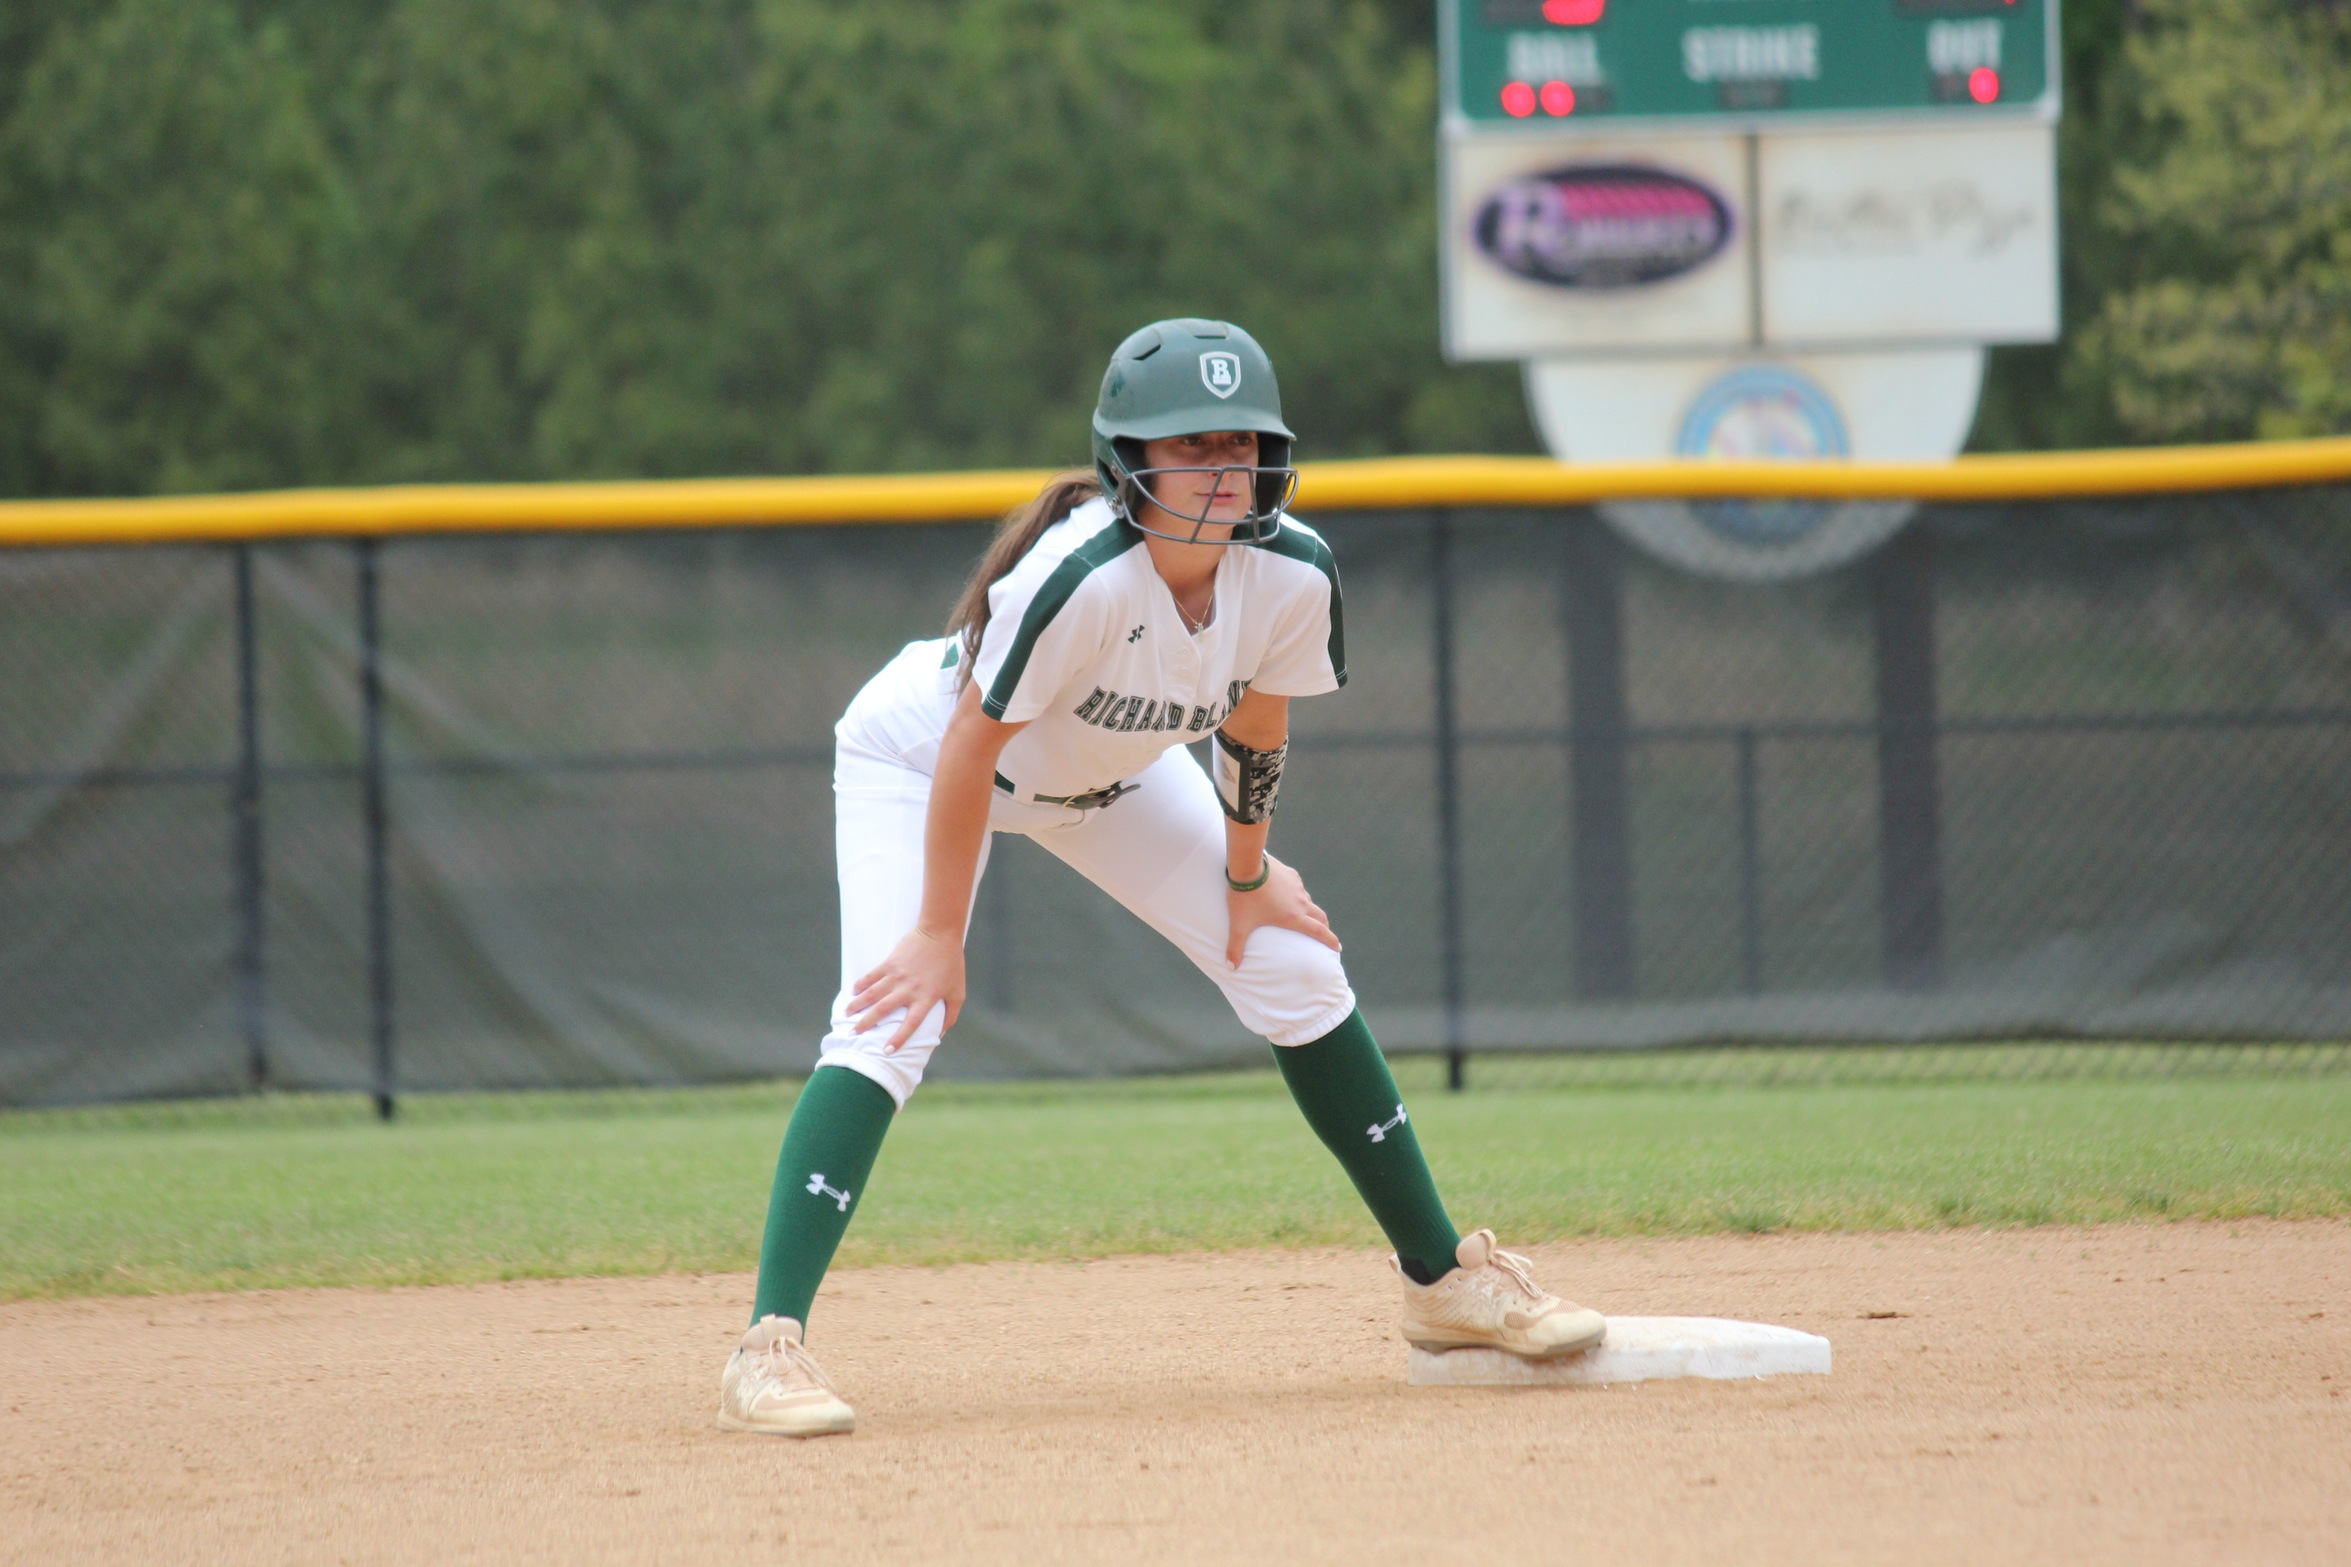 Graham Perfect at Plate, Helps Lead Statesmen in Region Tournament